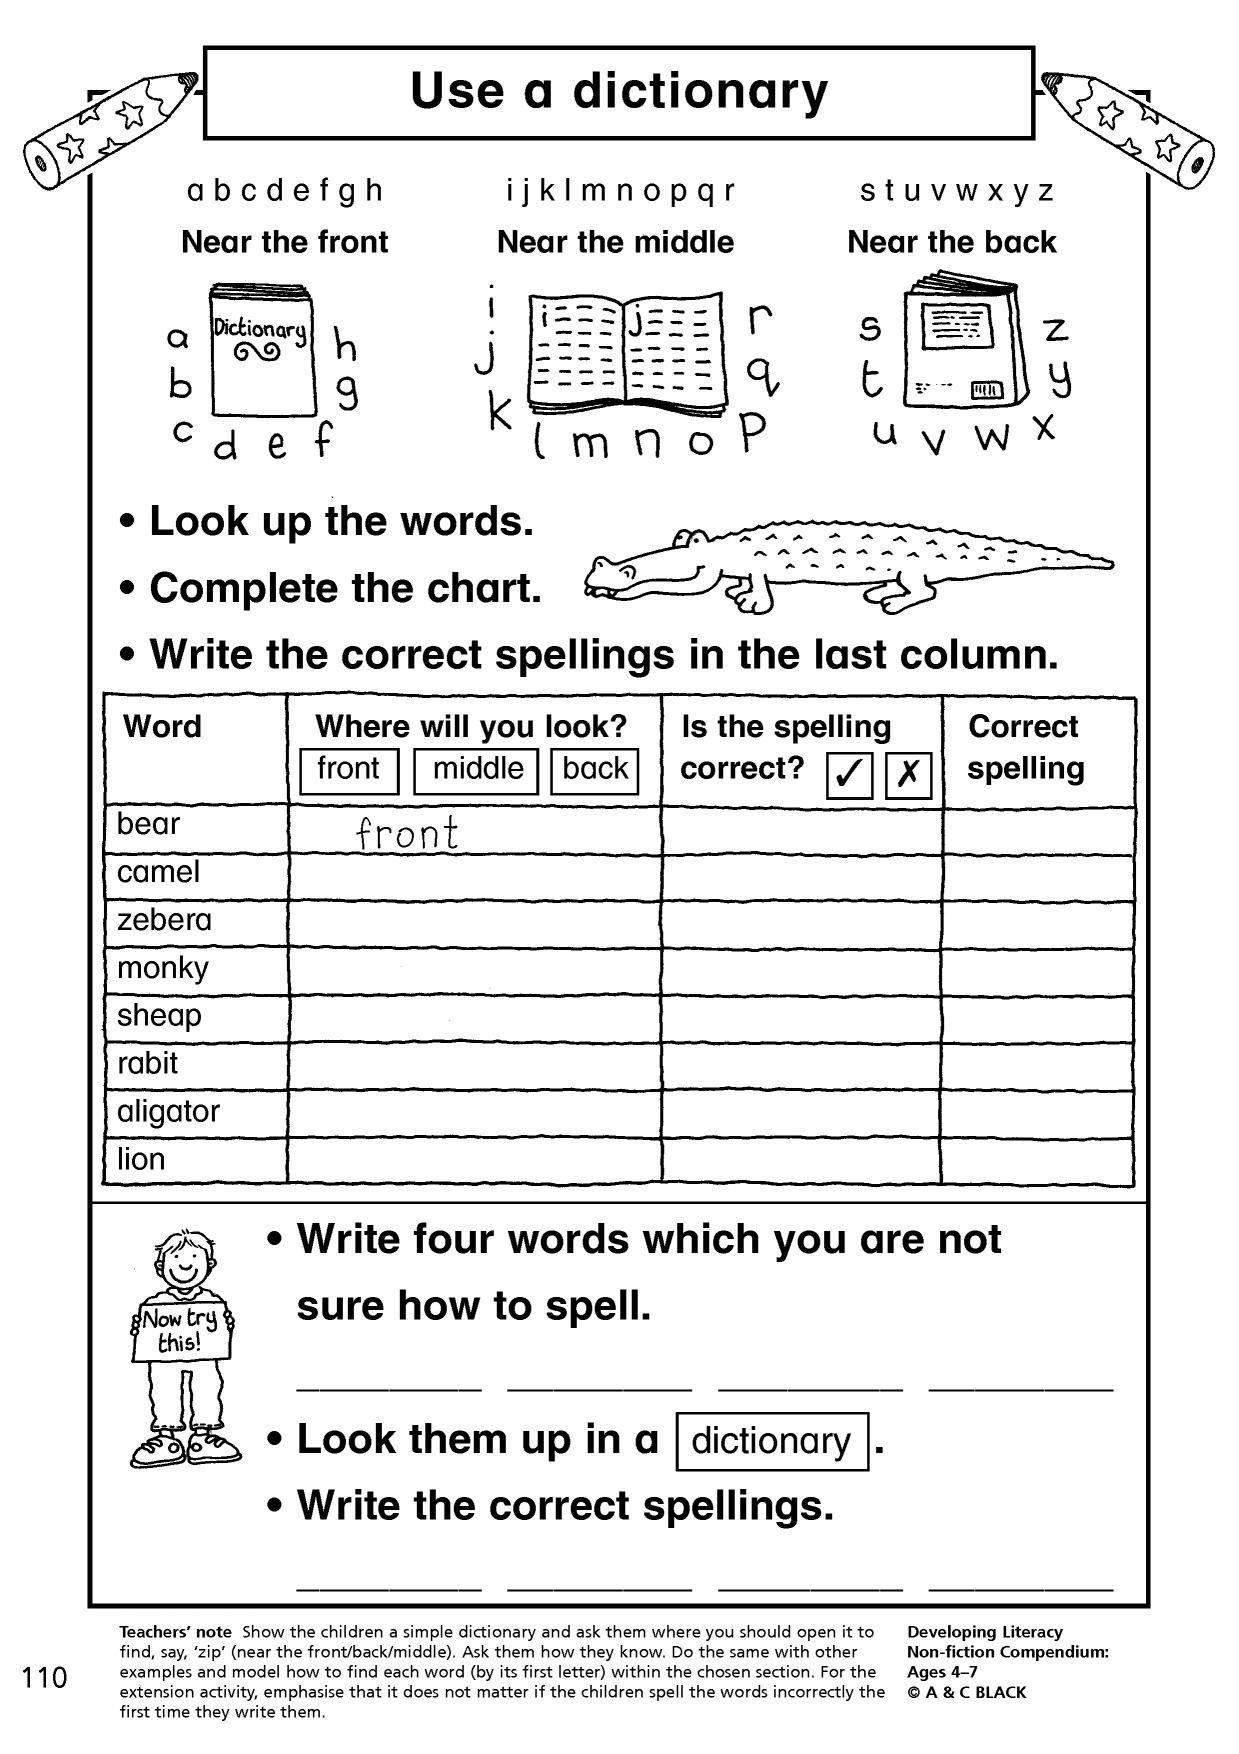 20 Dictionary Skill Worksheets 3rd Grade Worksheet From Home